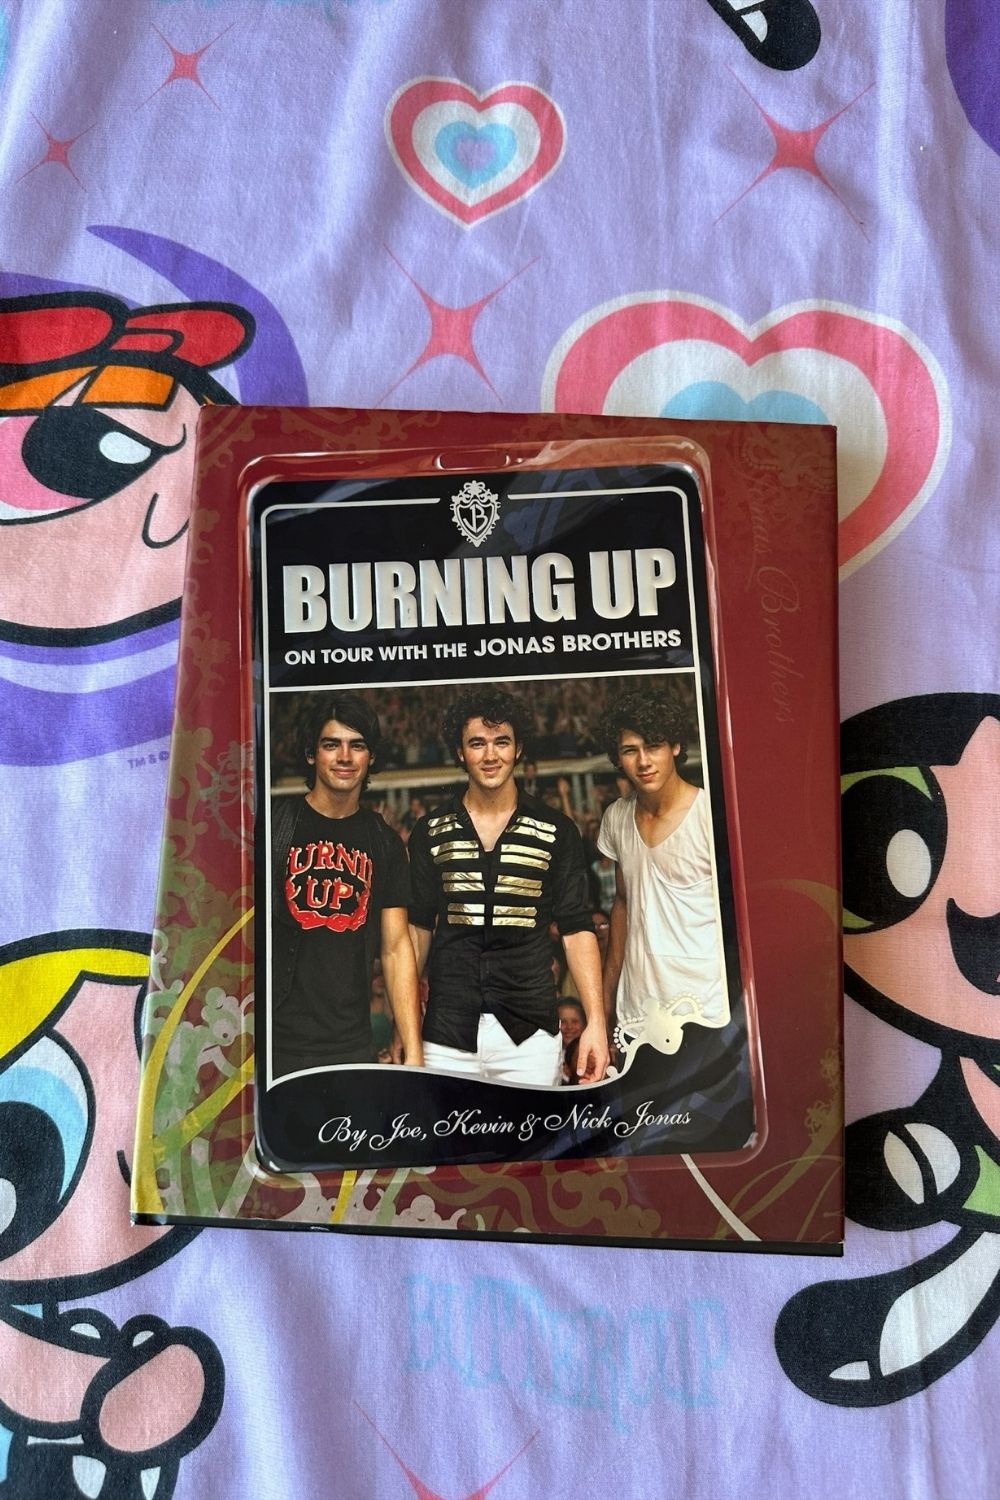 BURNING UP: ON TOUR WITH THE JONAS BROTHERS BOOK*